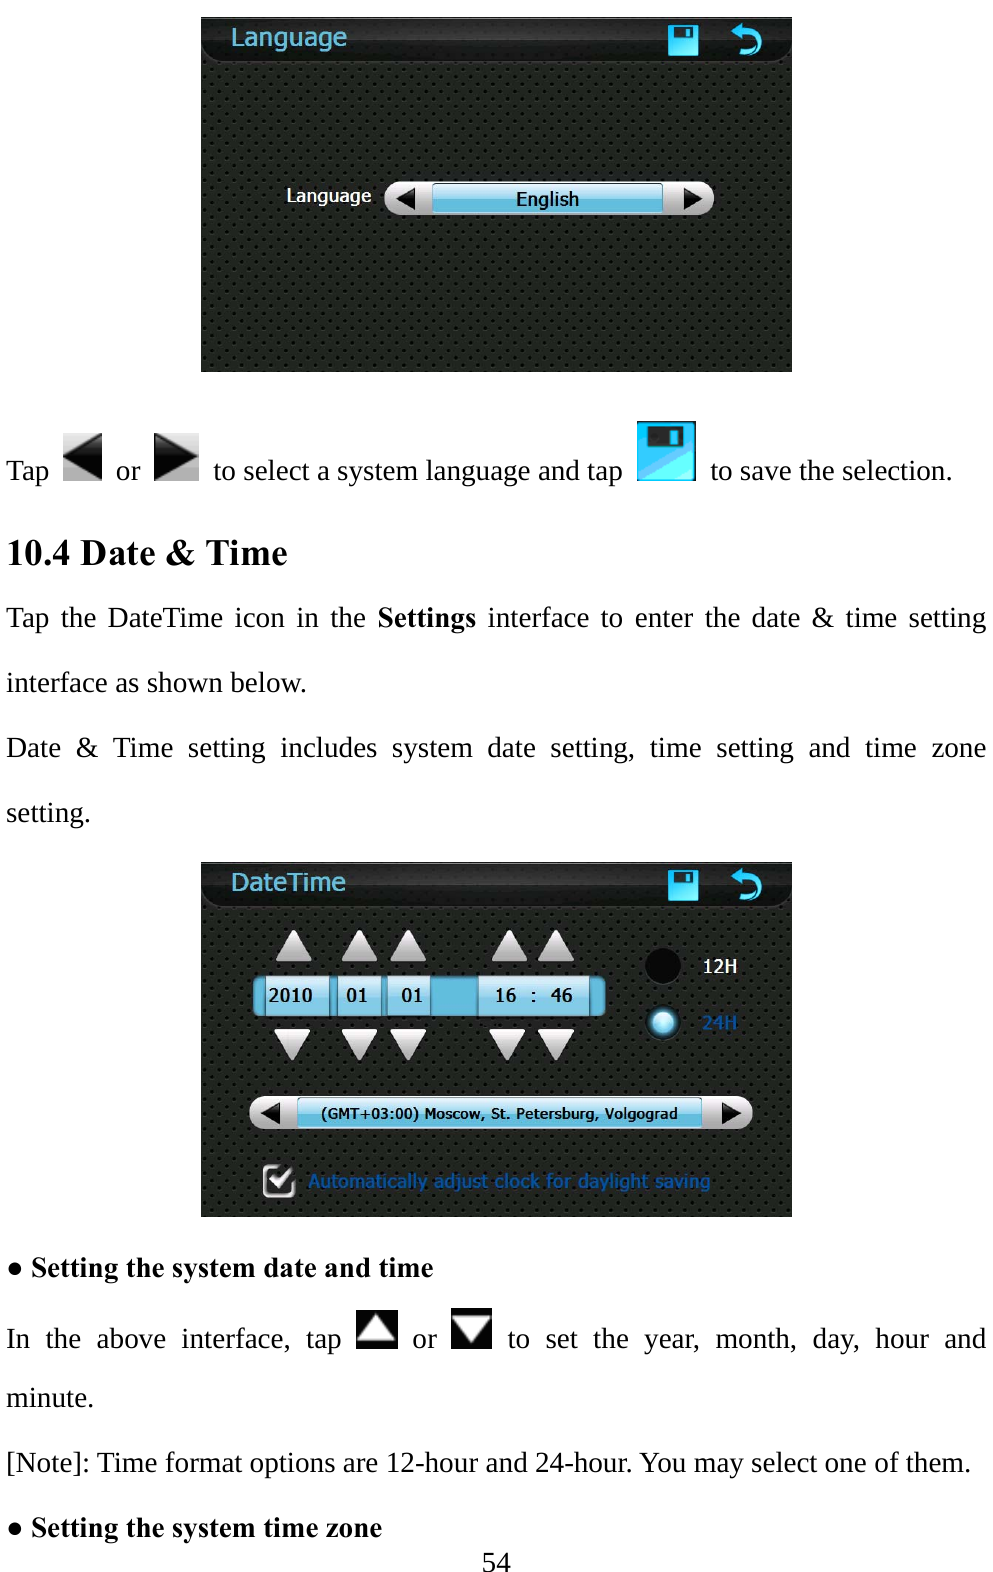  54  Tap   or    to select a system language and tap    to save the selection. 10.4 Date &amp; Time   Tap the DateTime icon in the Settings interface to enter the date &amp; time setting interface as shown below. Date &amp; Time setting includes system date setting, time setting and time zone setting.  ● Setting the system date and time In the above interface, tap   or   to set the year, month, day, hour and minute. [Note]: Time format options are 12-hour and 24-hour. You may select one of them. ● Setting the system time zone 